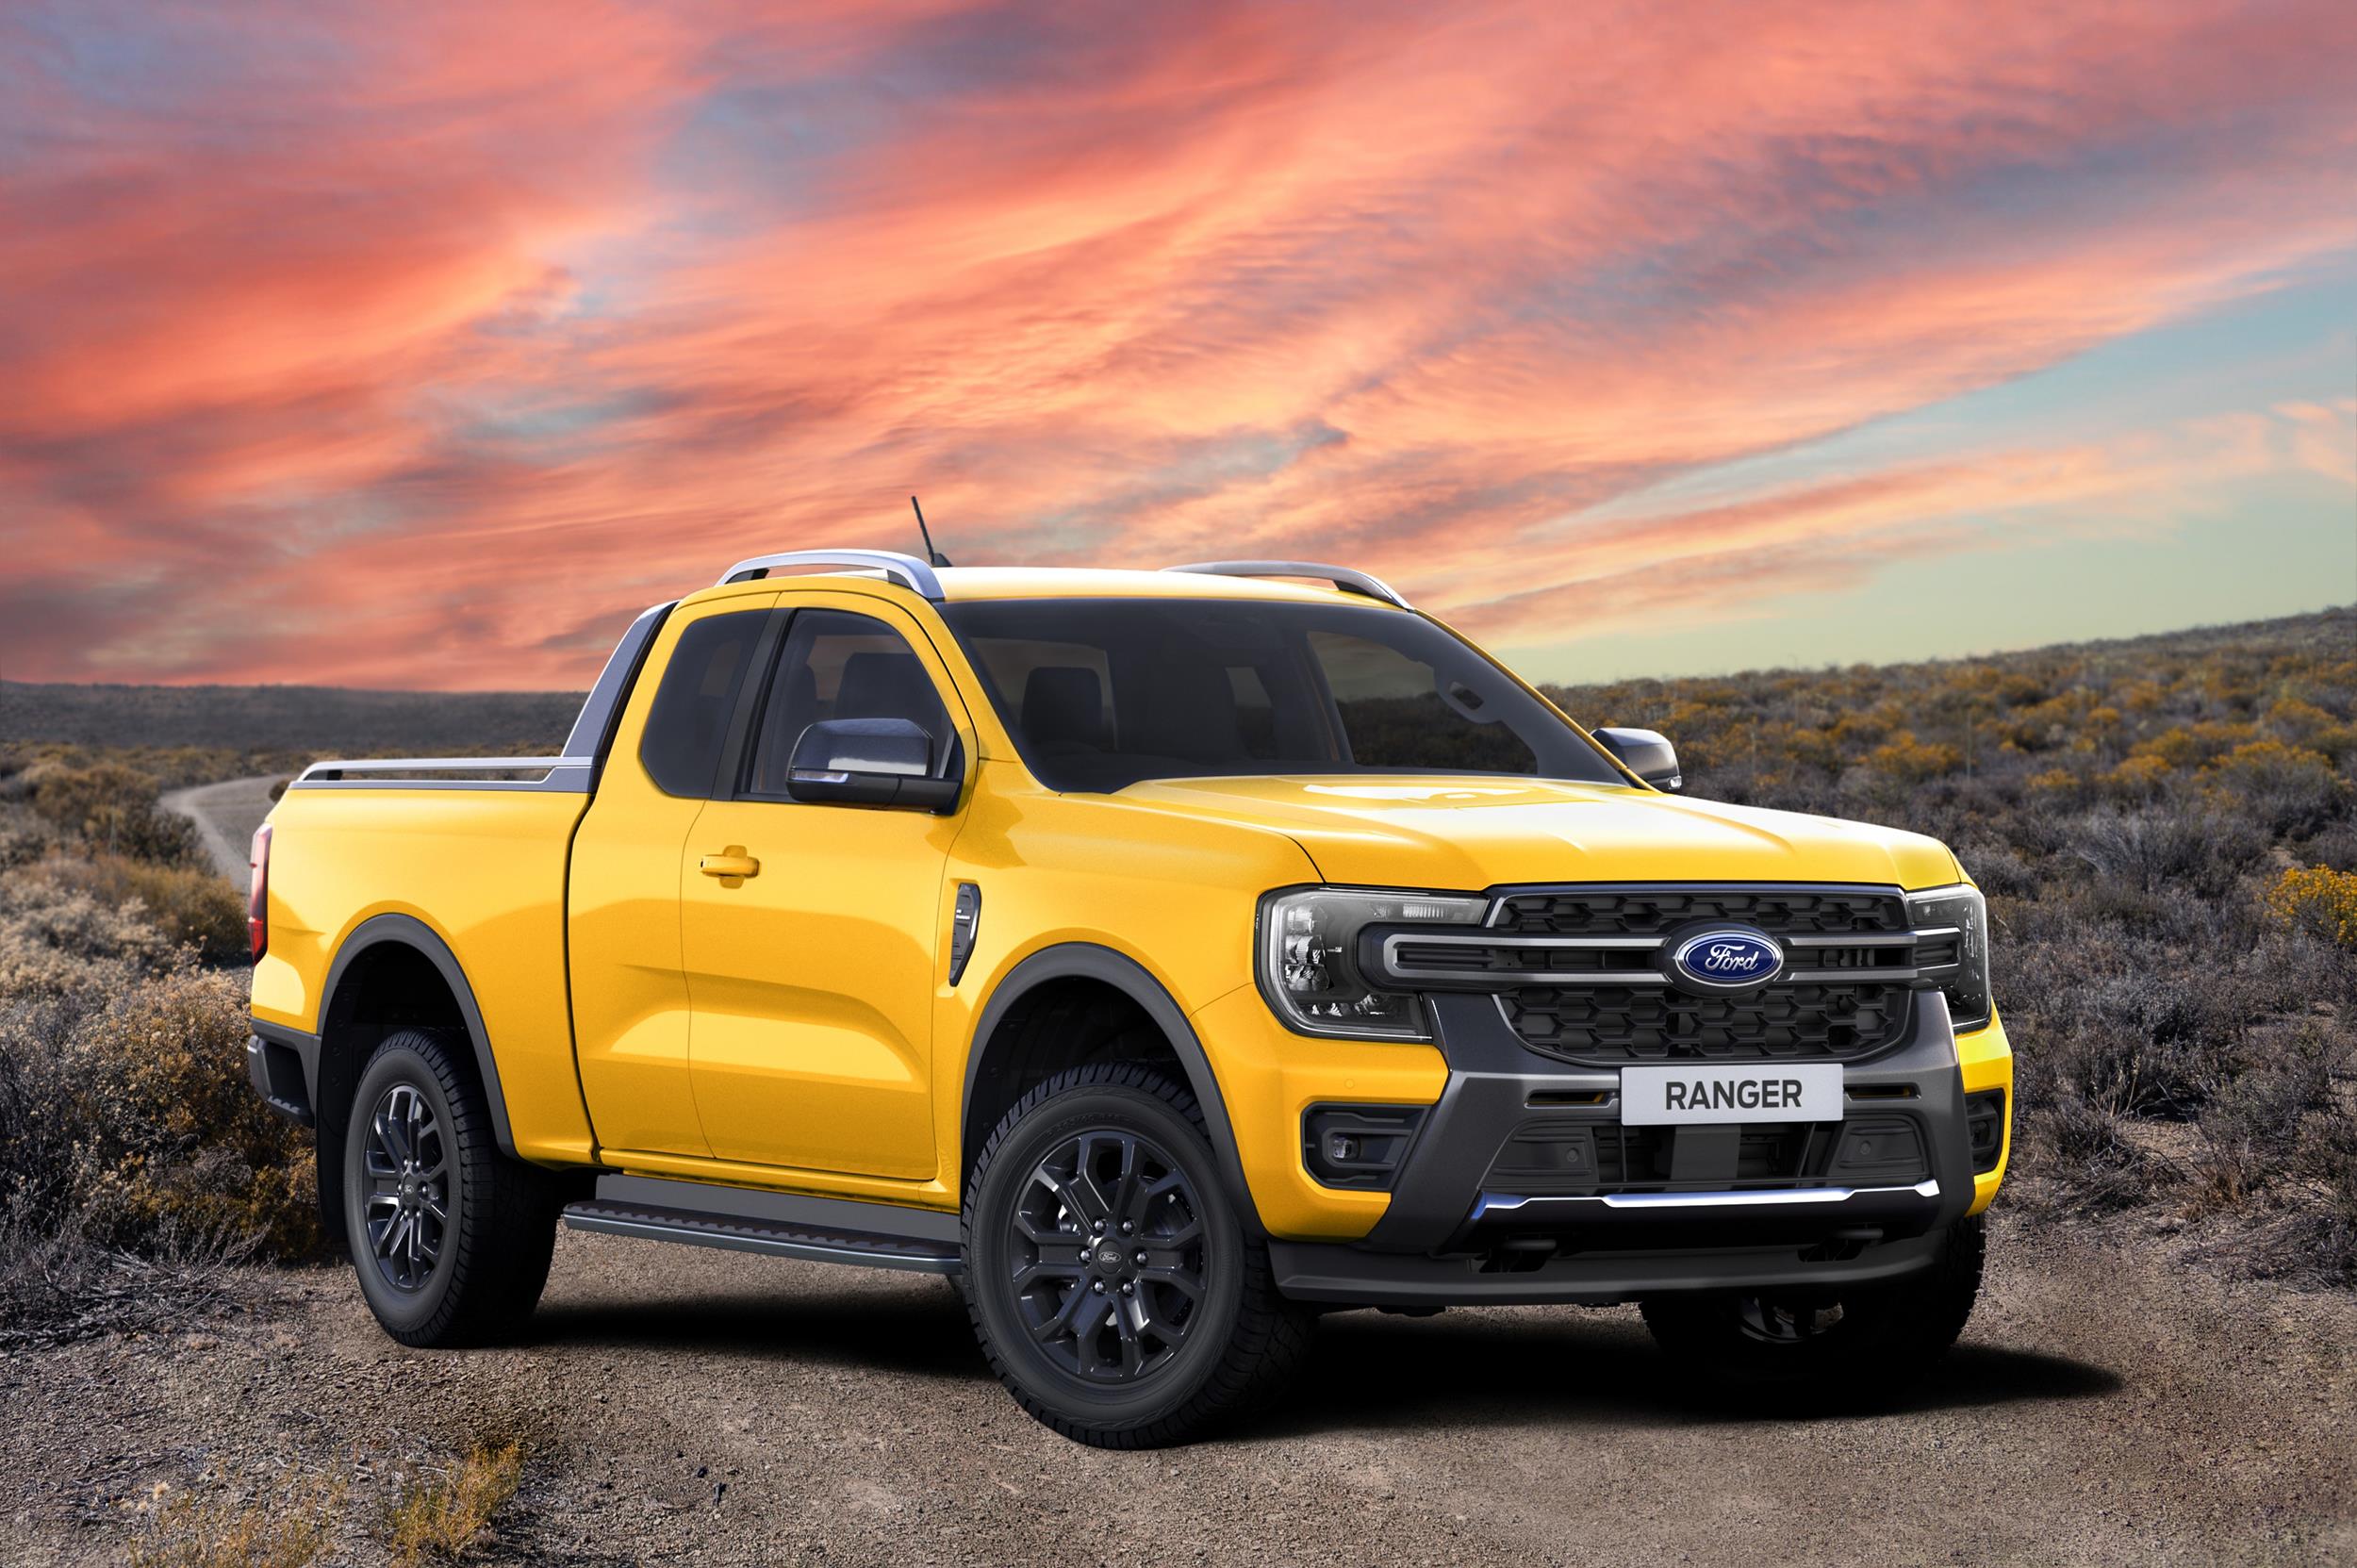 Next-Generation Ford Ranger Line-up Expands with Launch of Single Cab and SuperCab Models